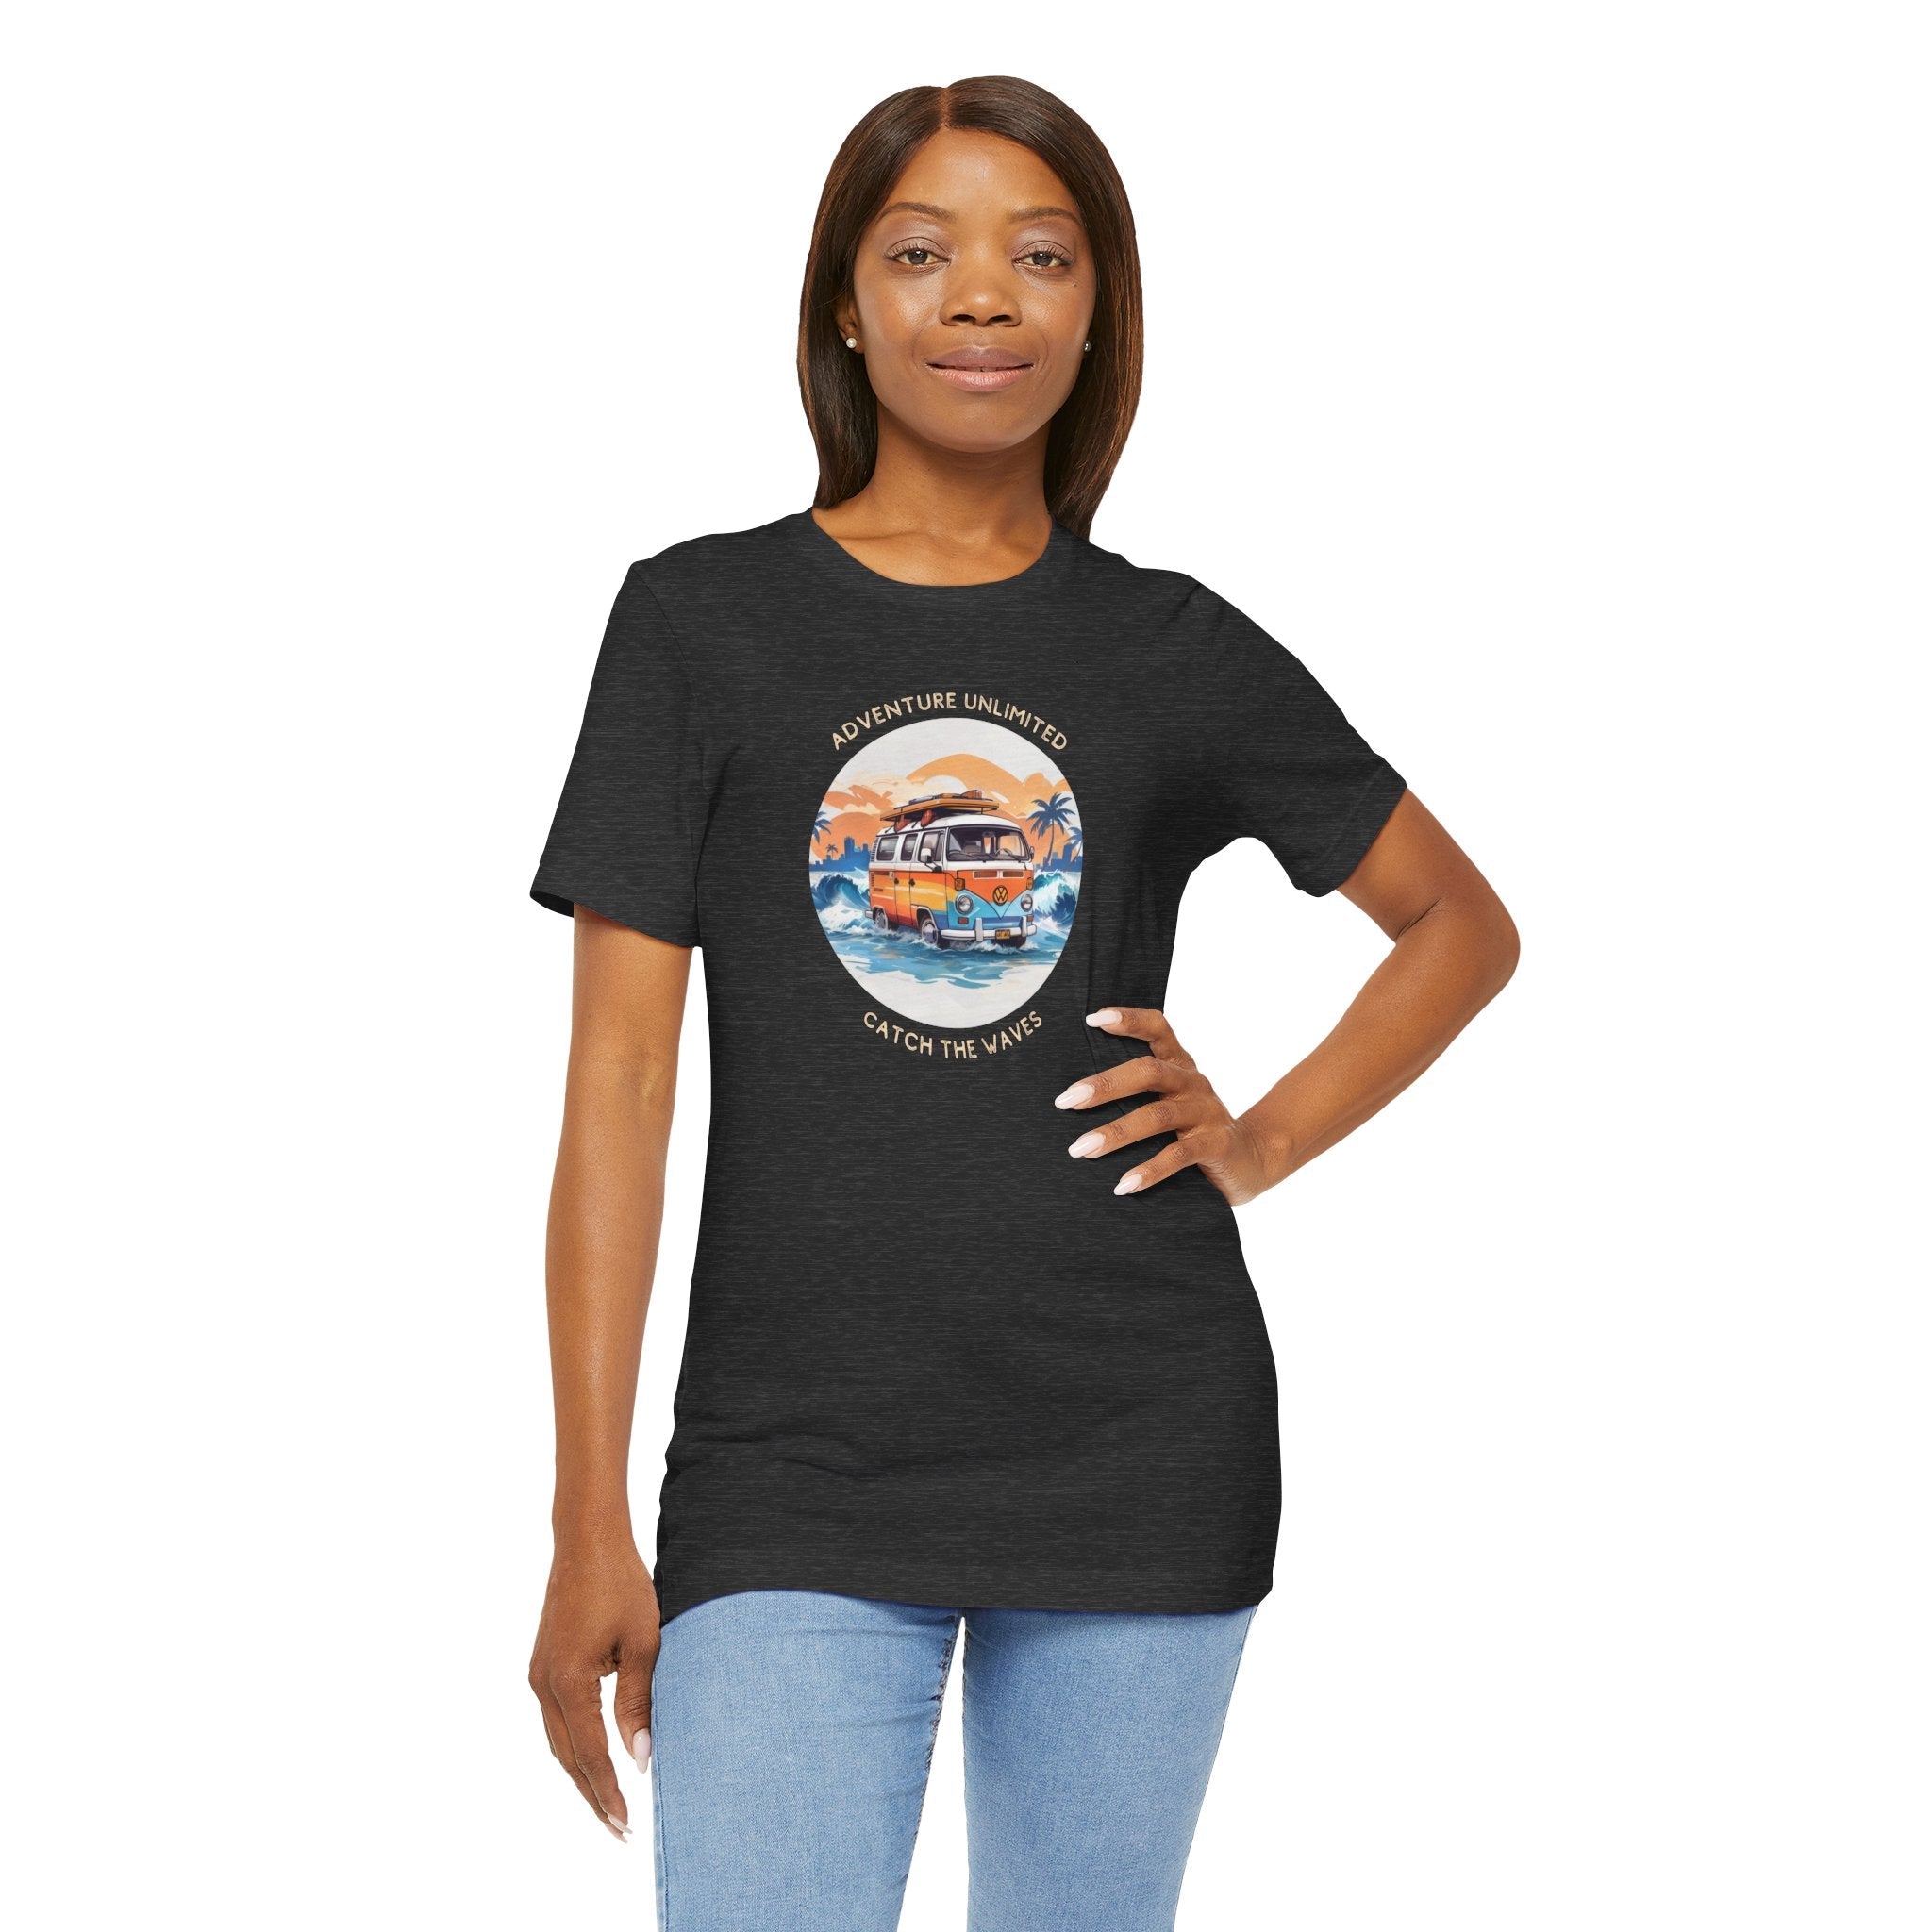 Adventure Unlimited - Unisex Jersey Short Sleeve Tee - US printed with ’I’m t-shirt’ worn by woman